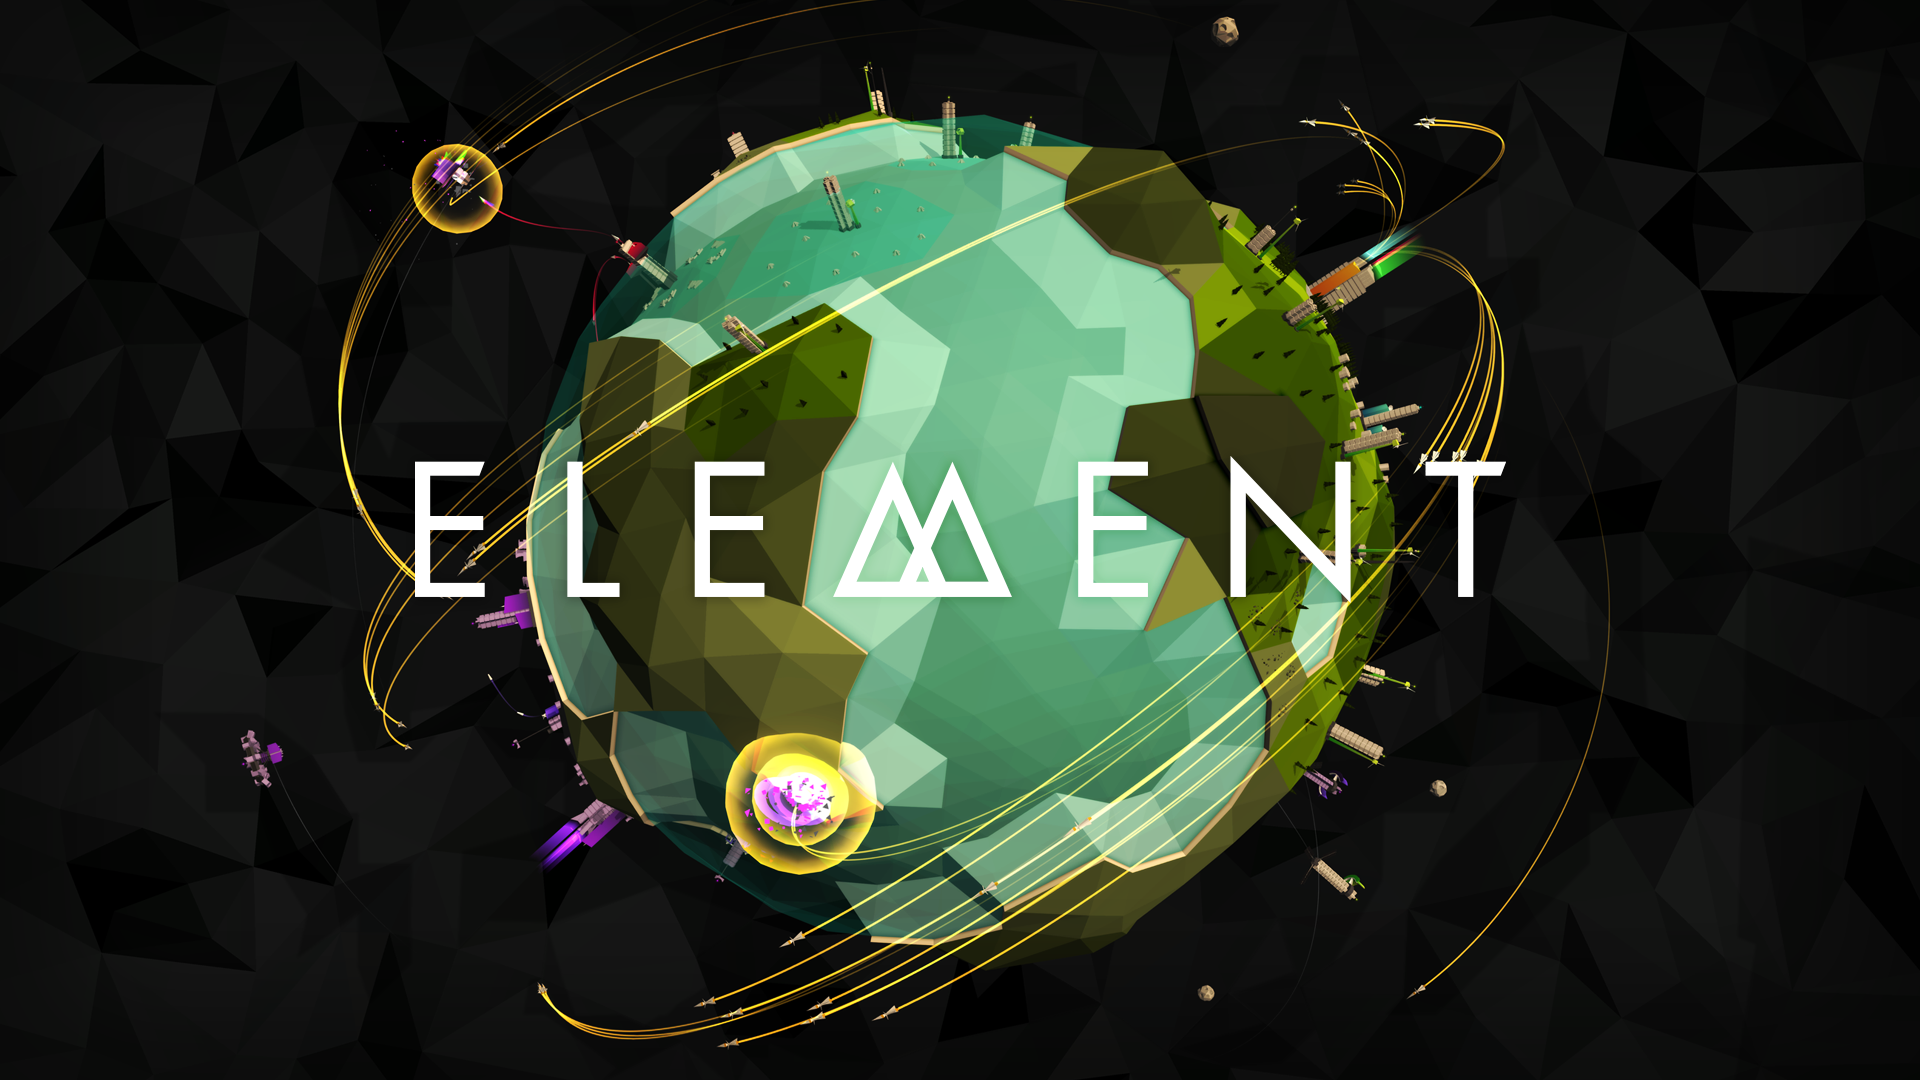 Element video. Игра элементы. The element. Elements фото. Элементы картинки.